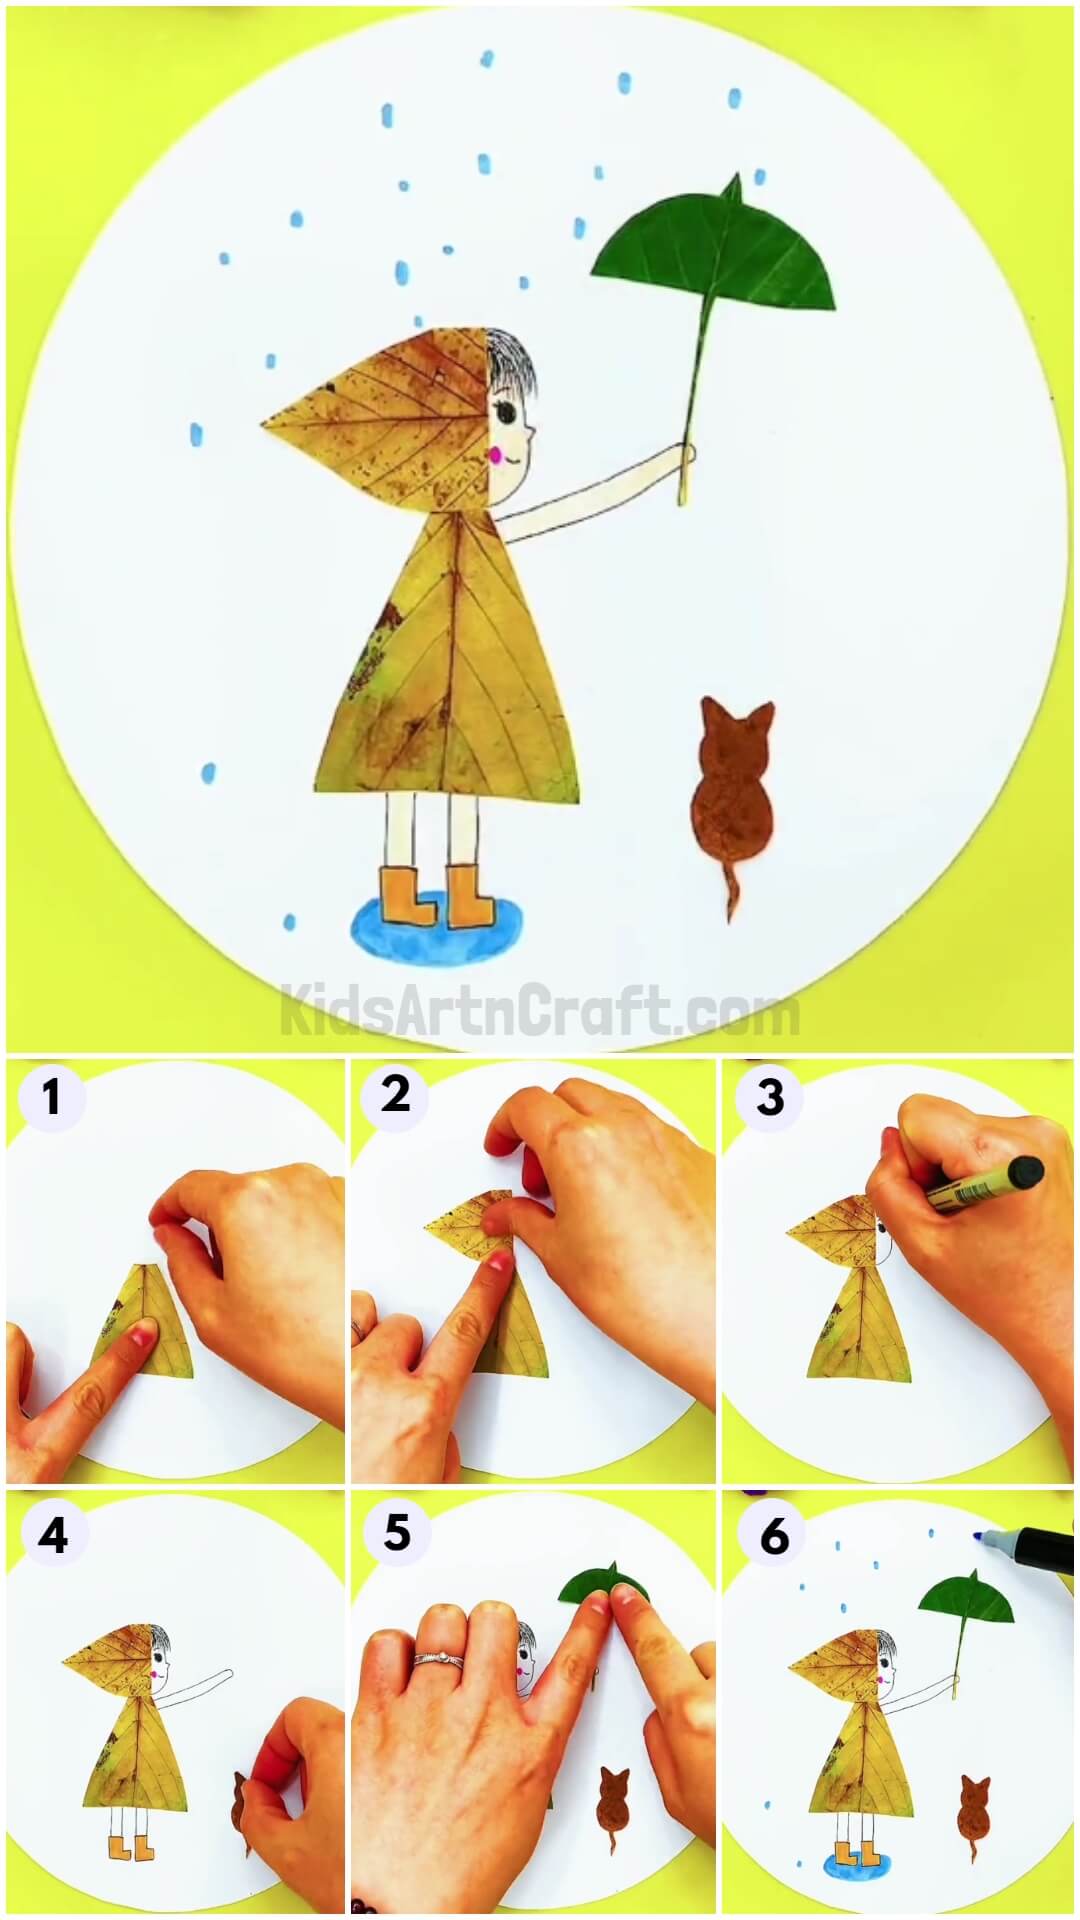 Girl And Cat In Rain Craft Using Leaves Tutorial For Kids